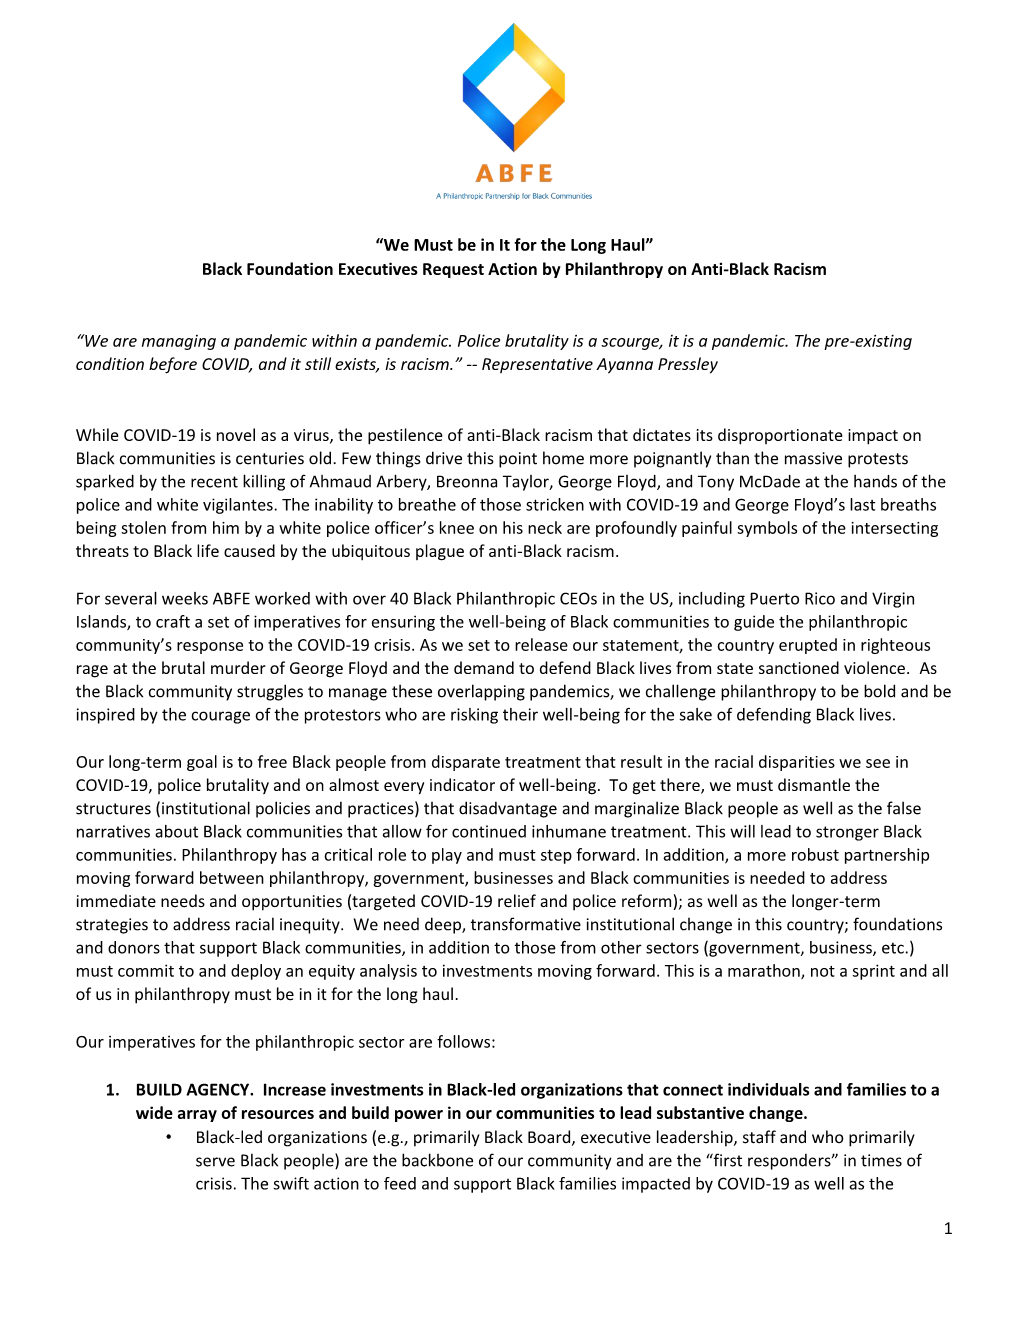 ABFE Joint Statement on COVID and Police Shootings